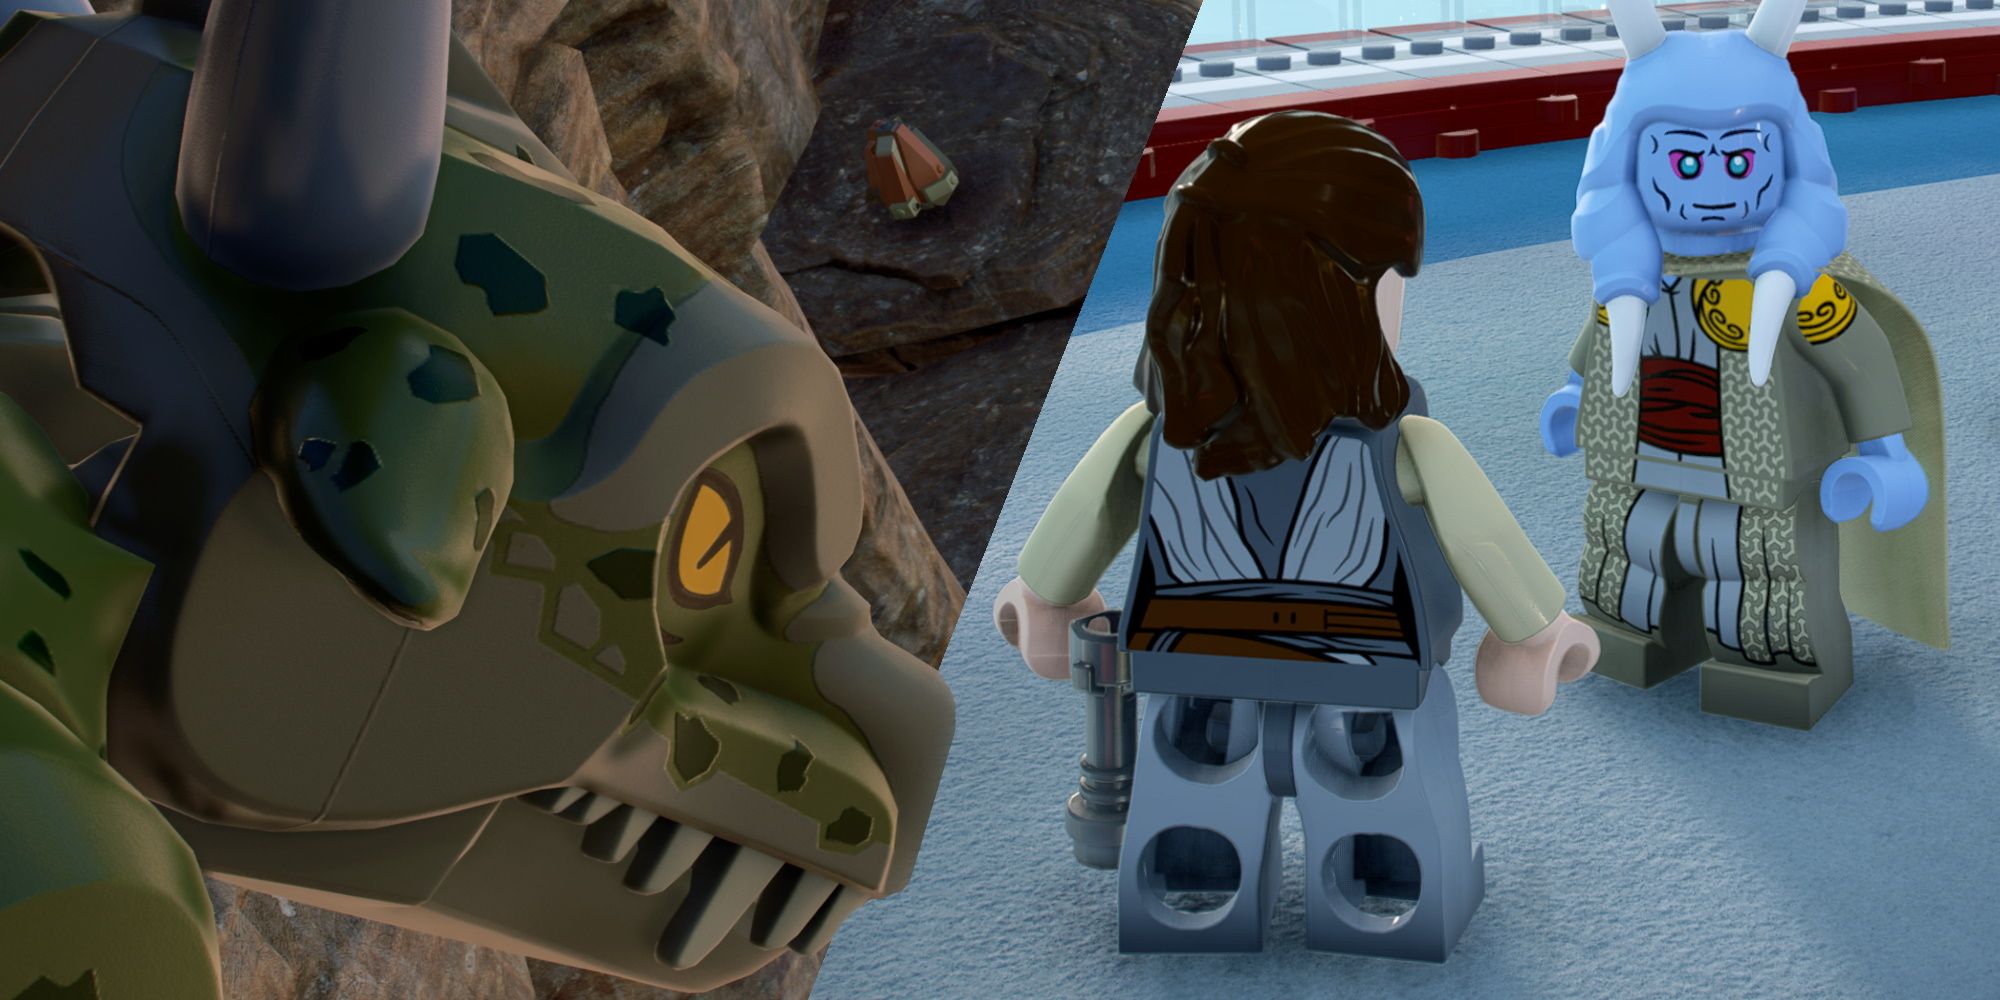 Lego Star Wars Skywalker Saga, Federal District Featured Image (showing the Krayt Dragon as well as Mas)